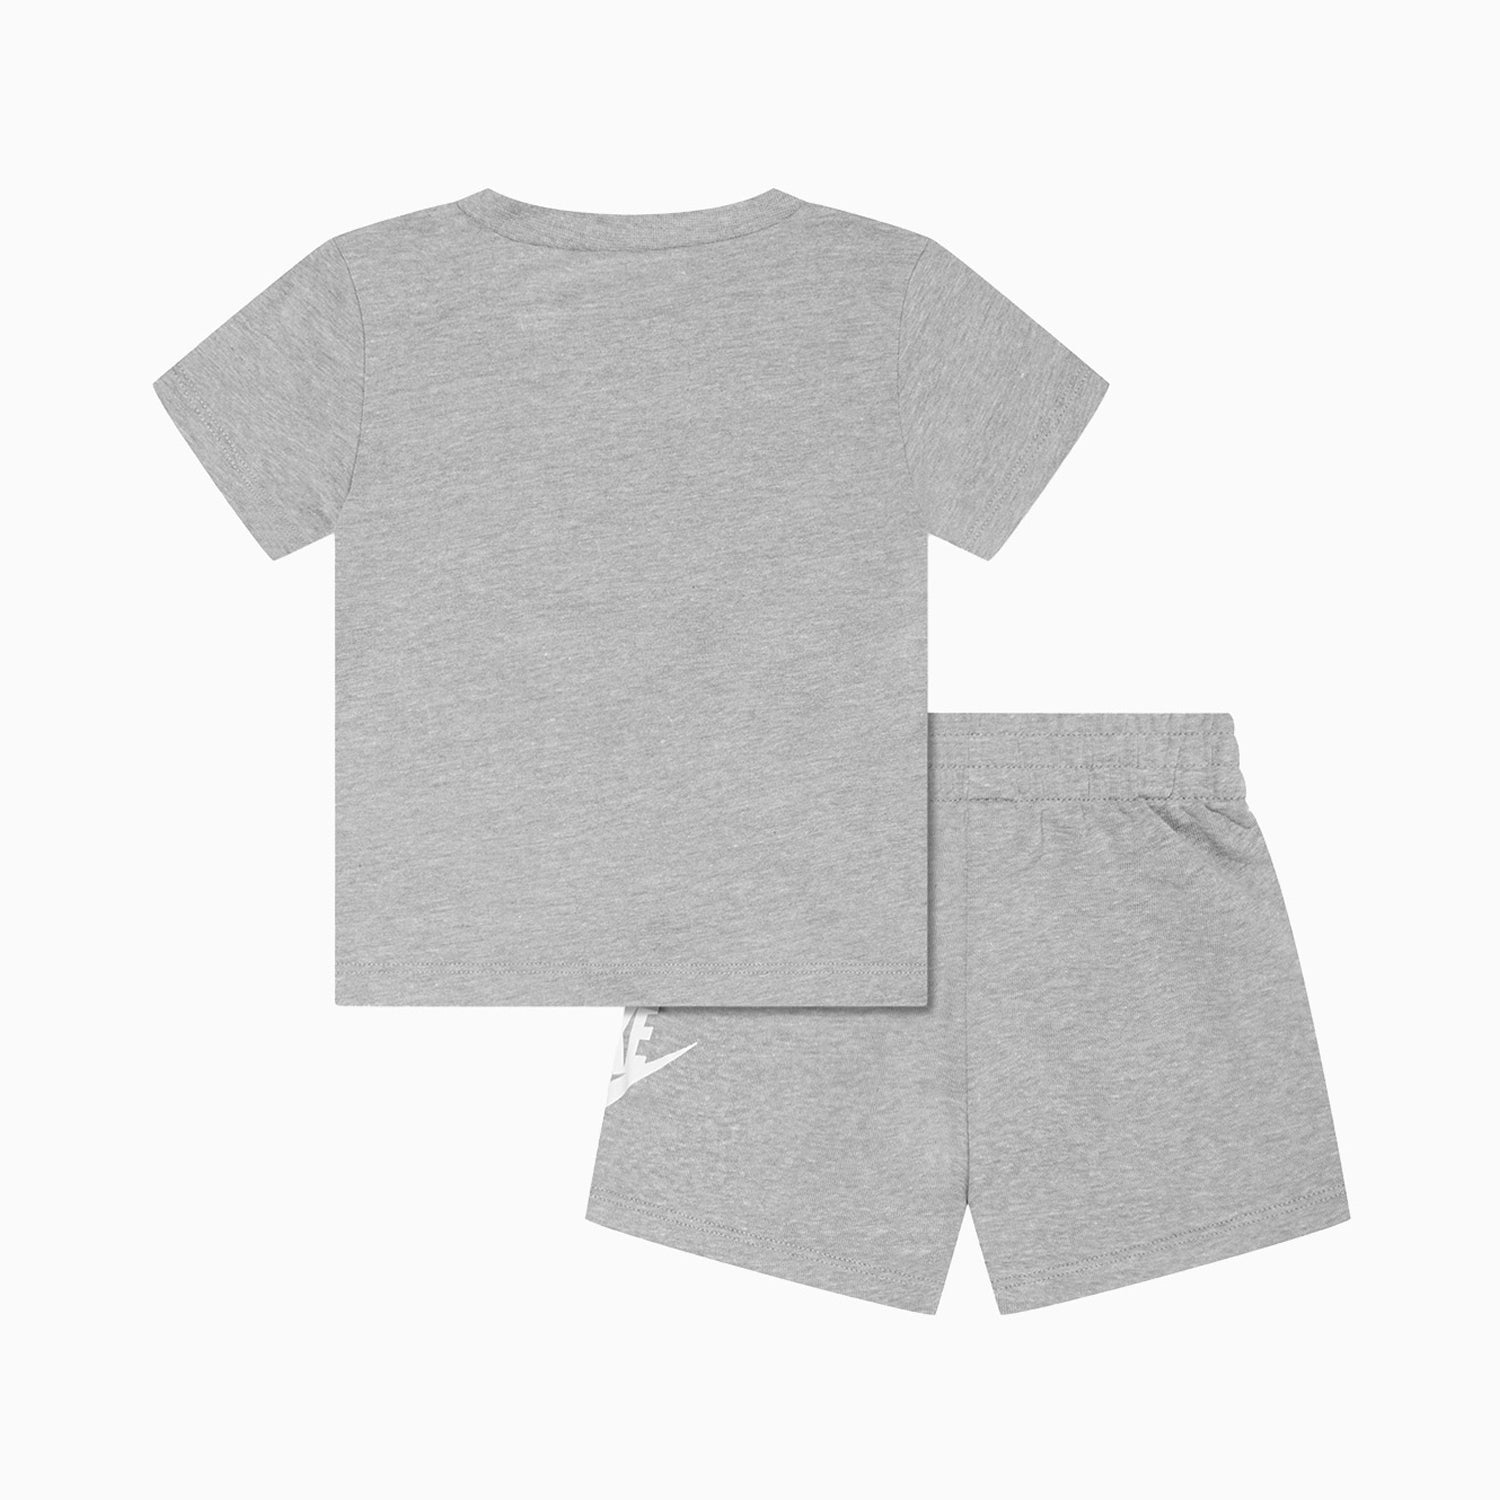 nike-kids-sportswear-club-t-shirt-and-shorts-2-piece-set-outfit-